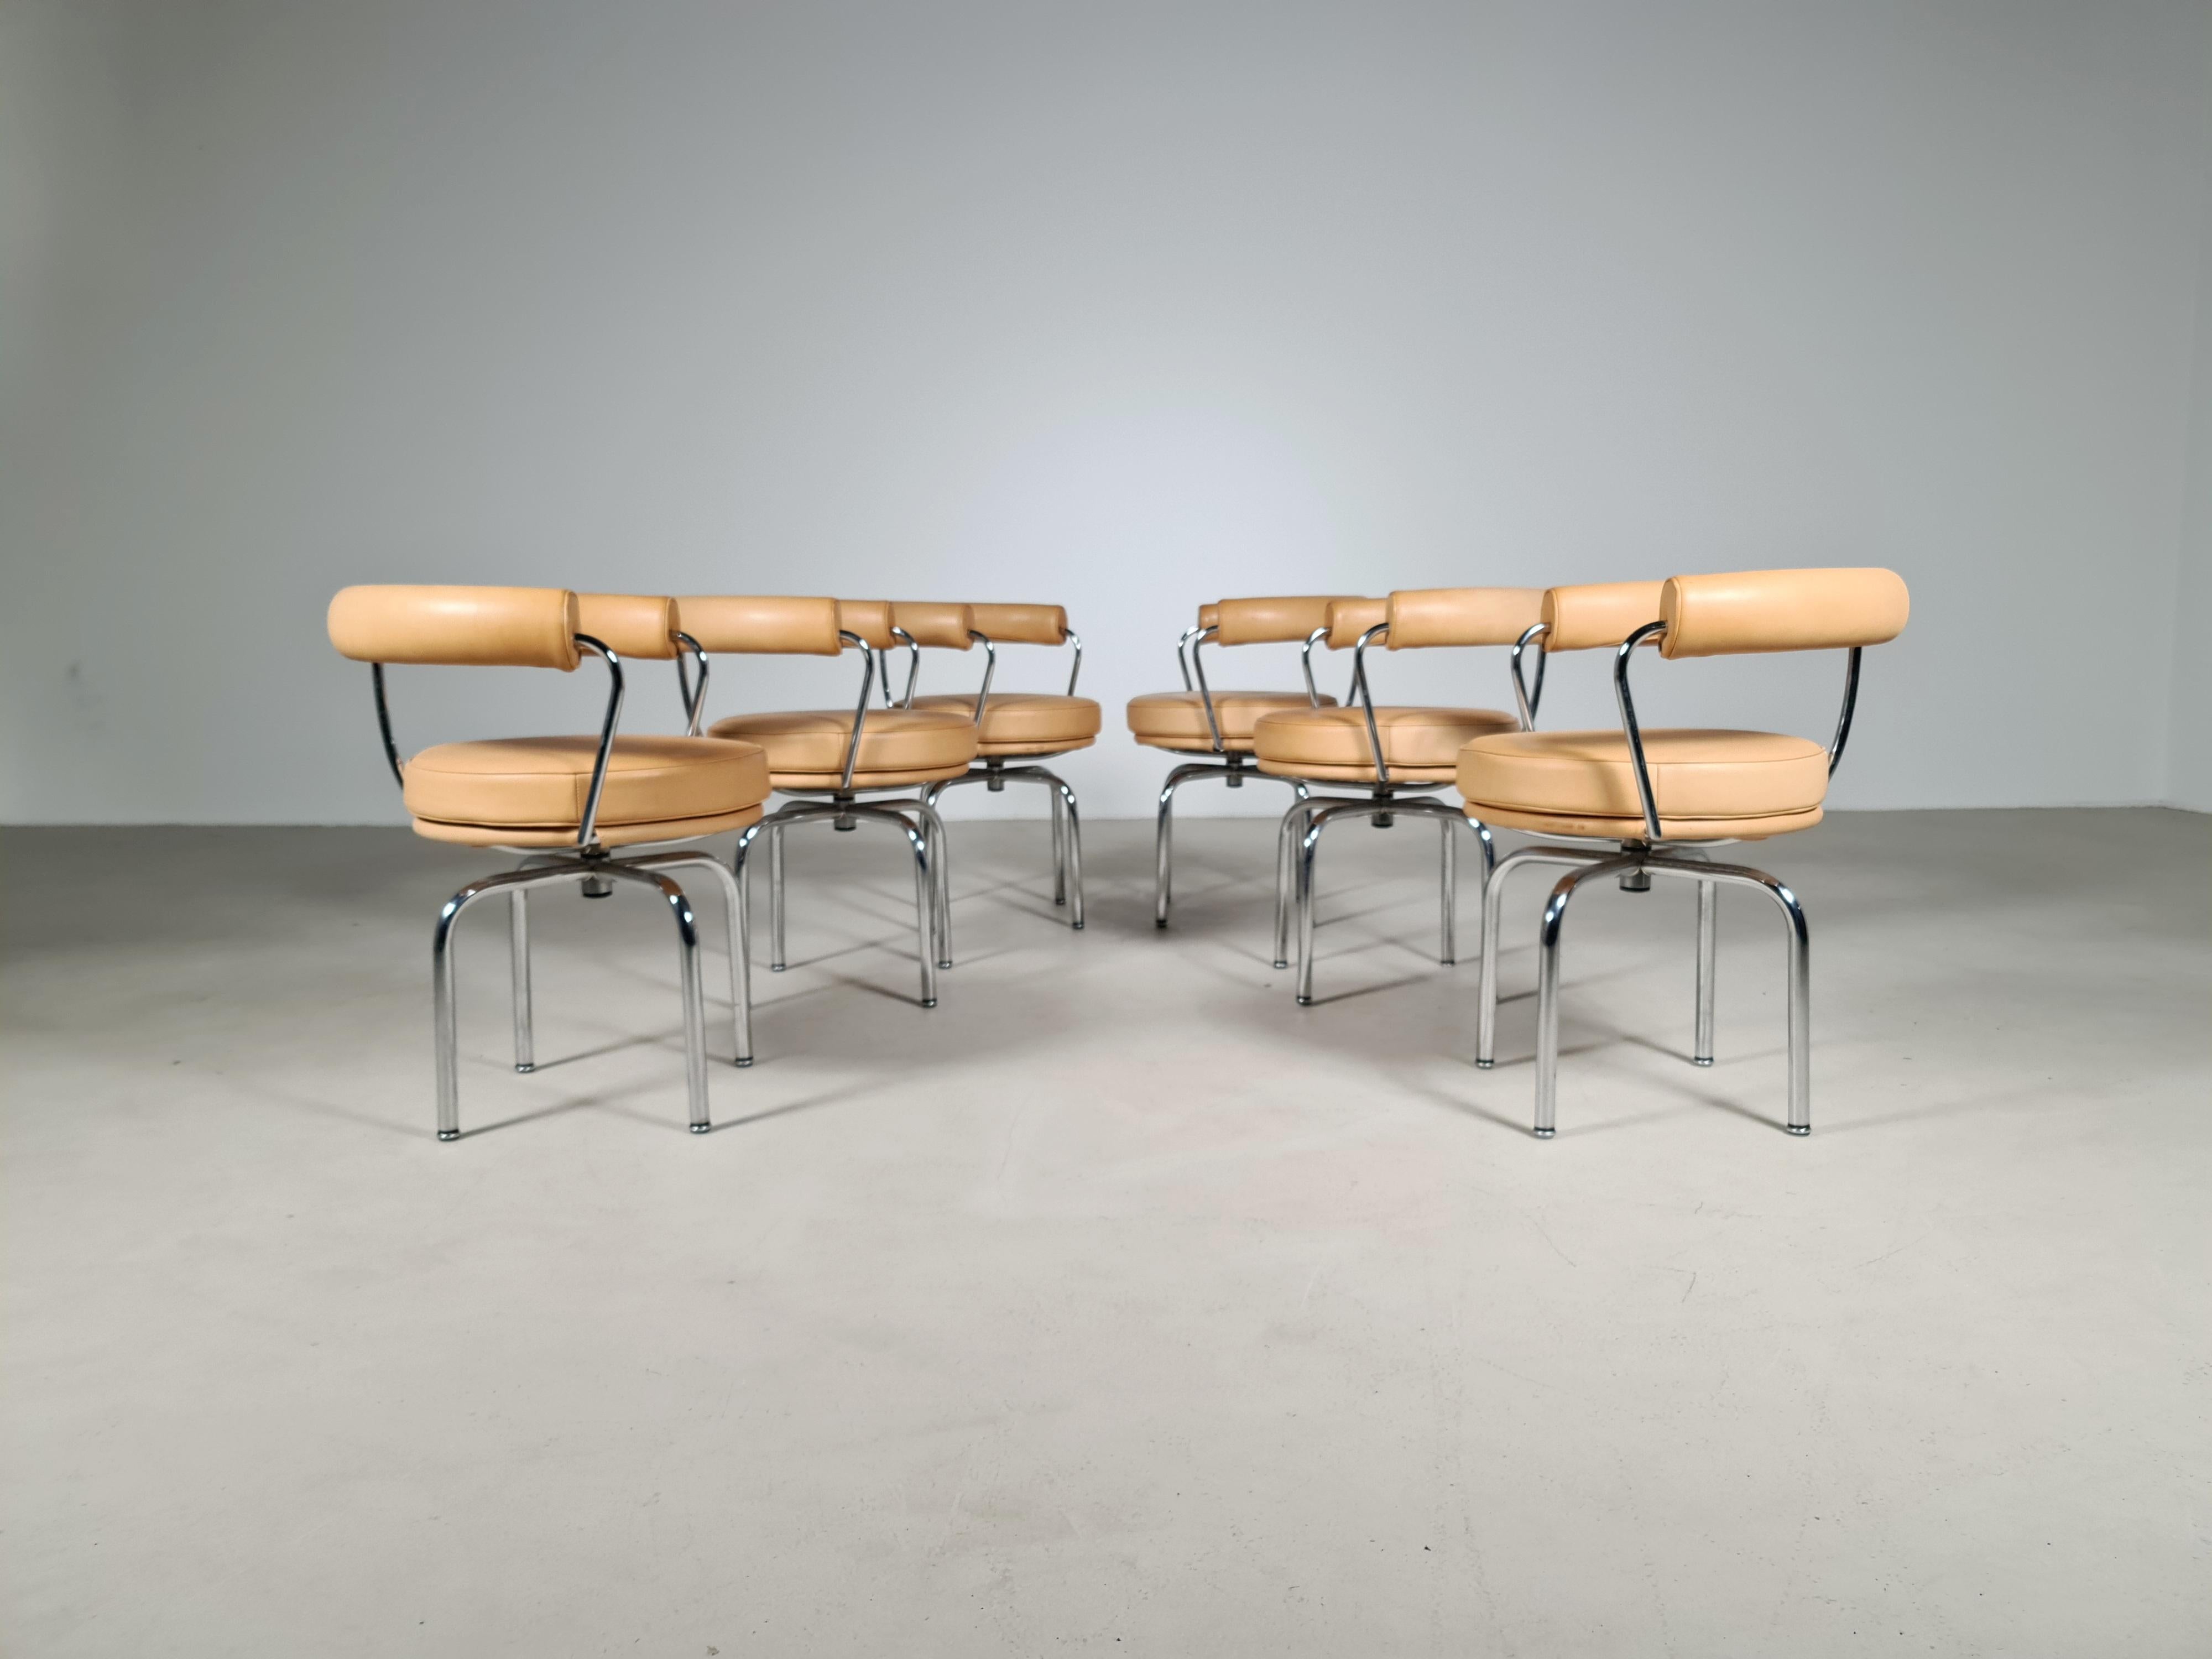 Stainless Steel Set of 6 Lc7 Swivel Chairs by Charlotte Perriand for Cassina, 1990s